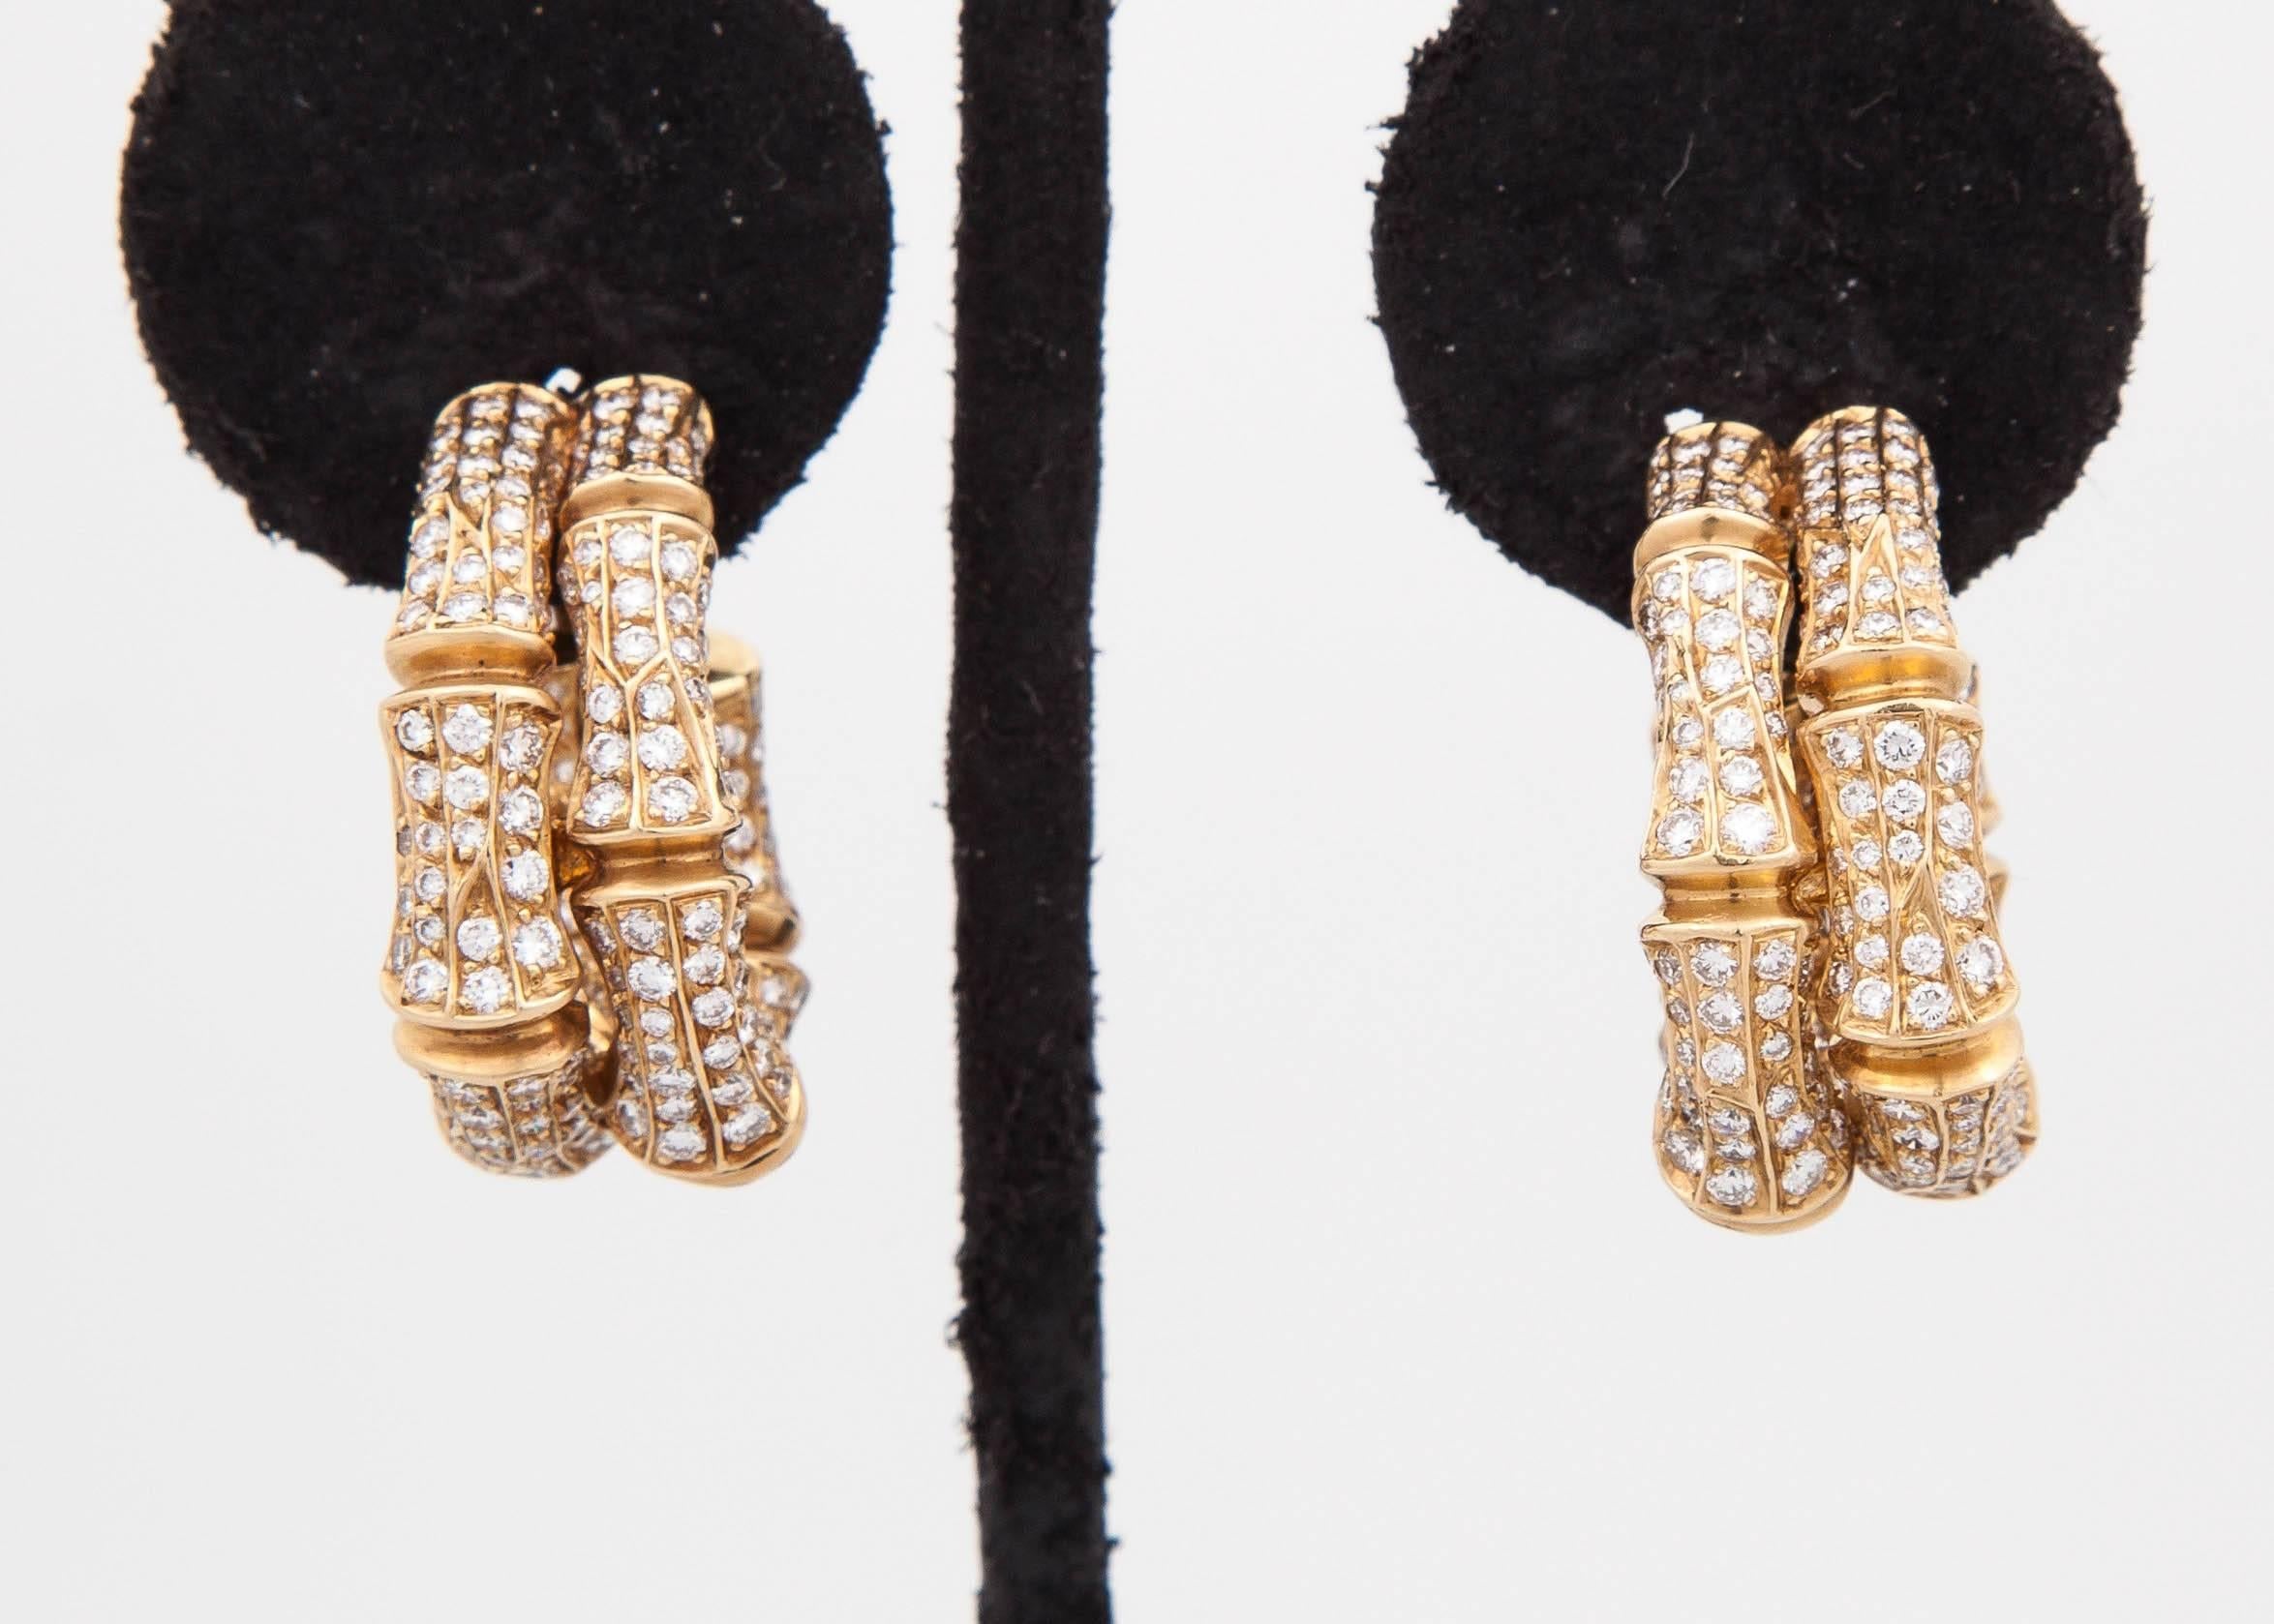 Splendid Cartier earrings, designed as a series of bamboo motif set with brilliant-cut diamonds, mounted in 18k yellow gold.